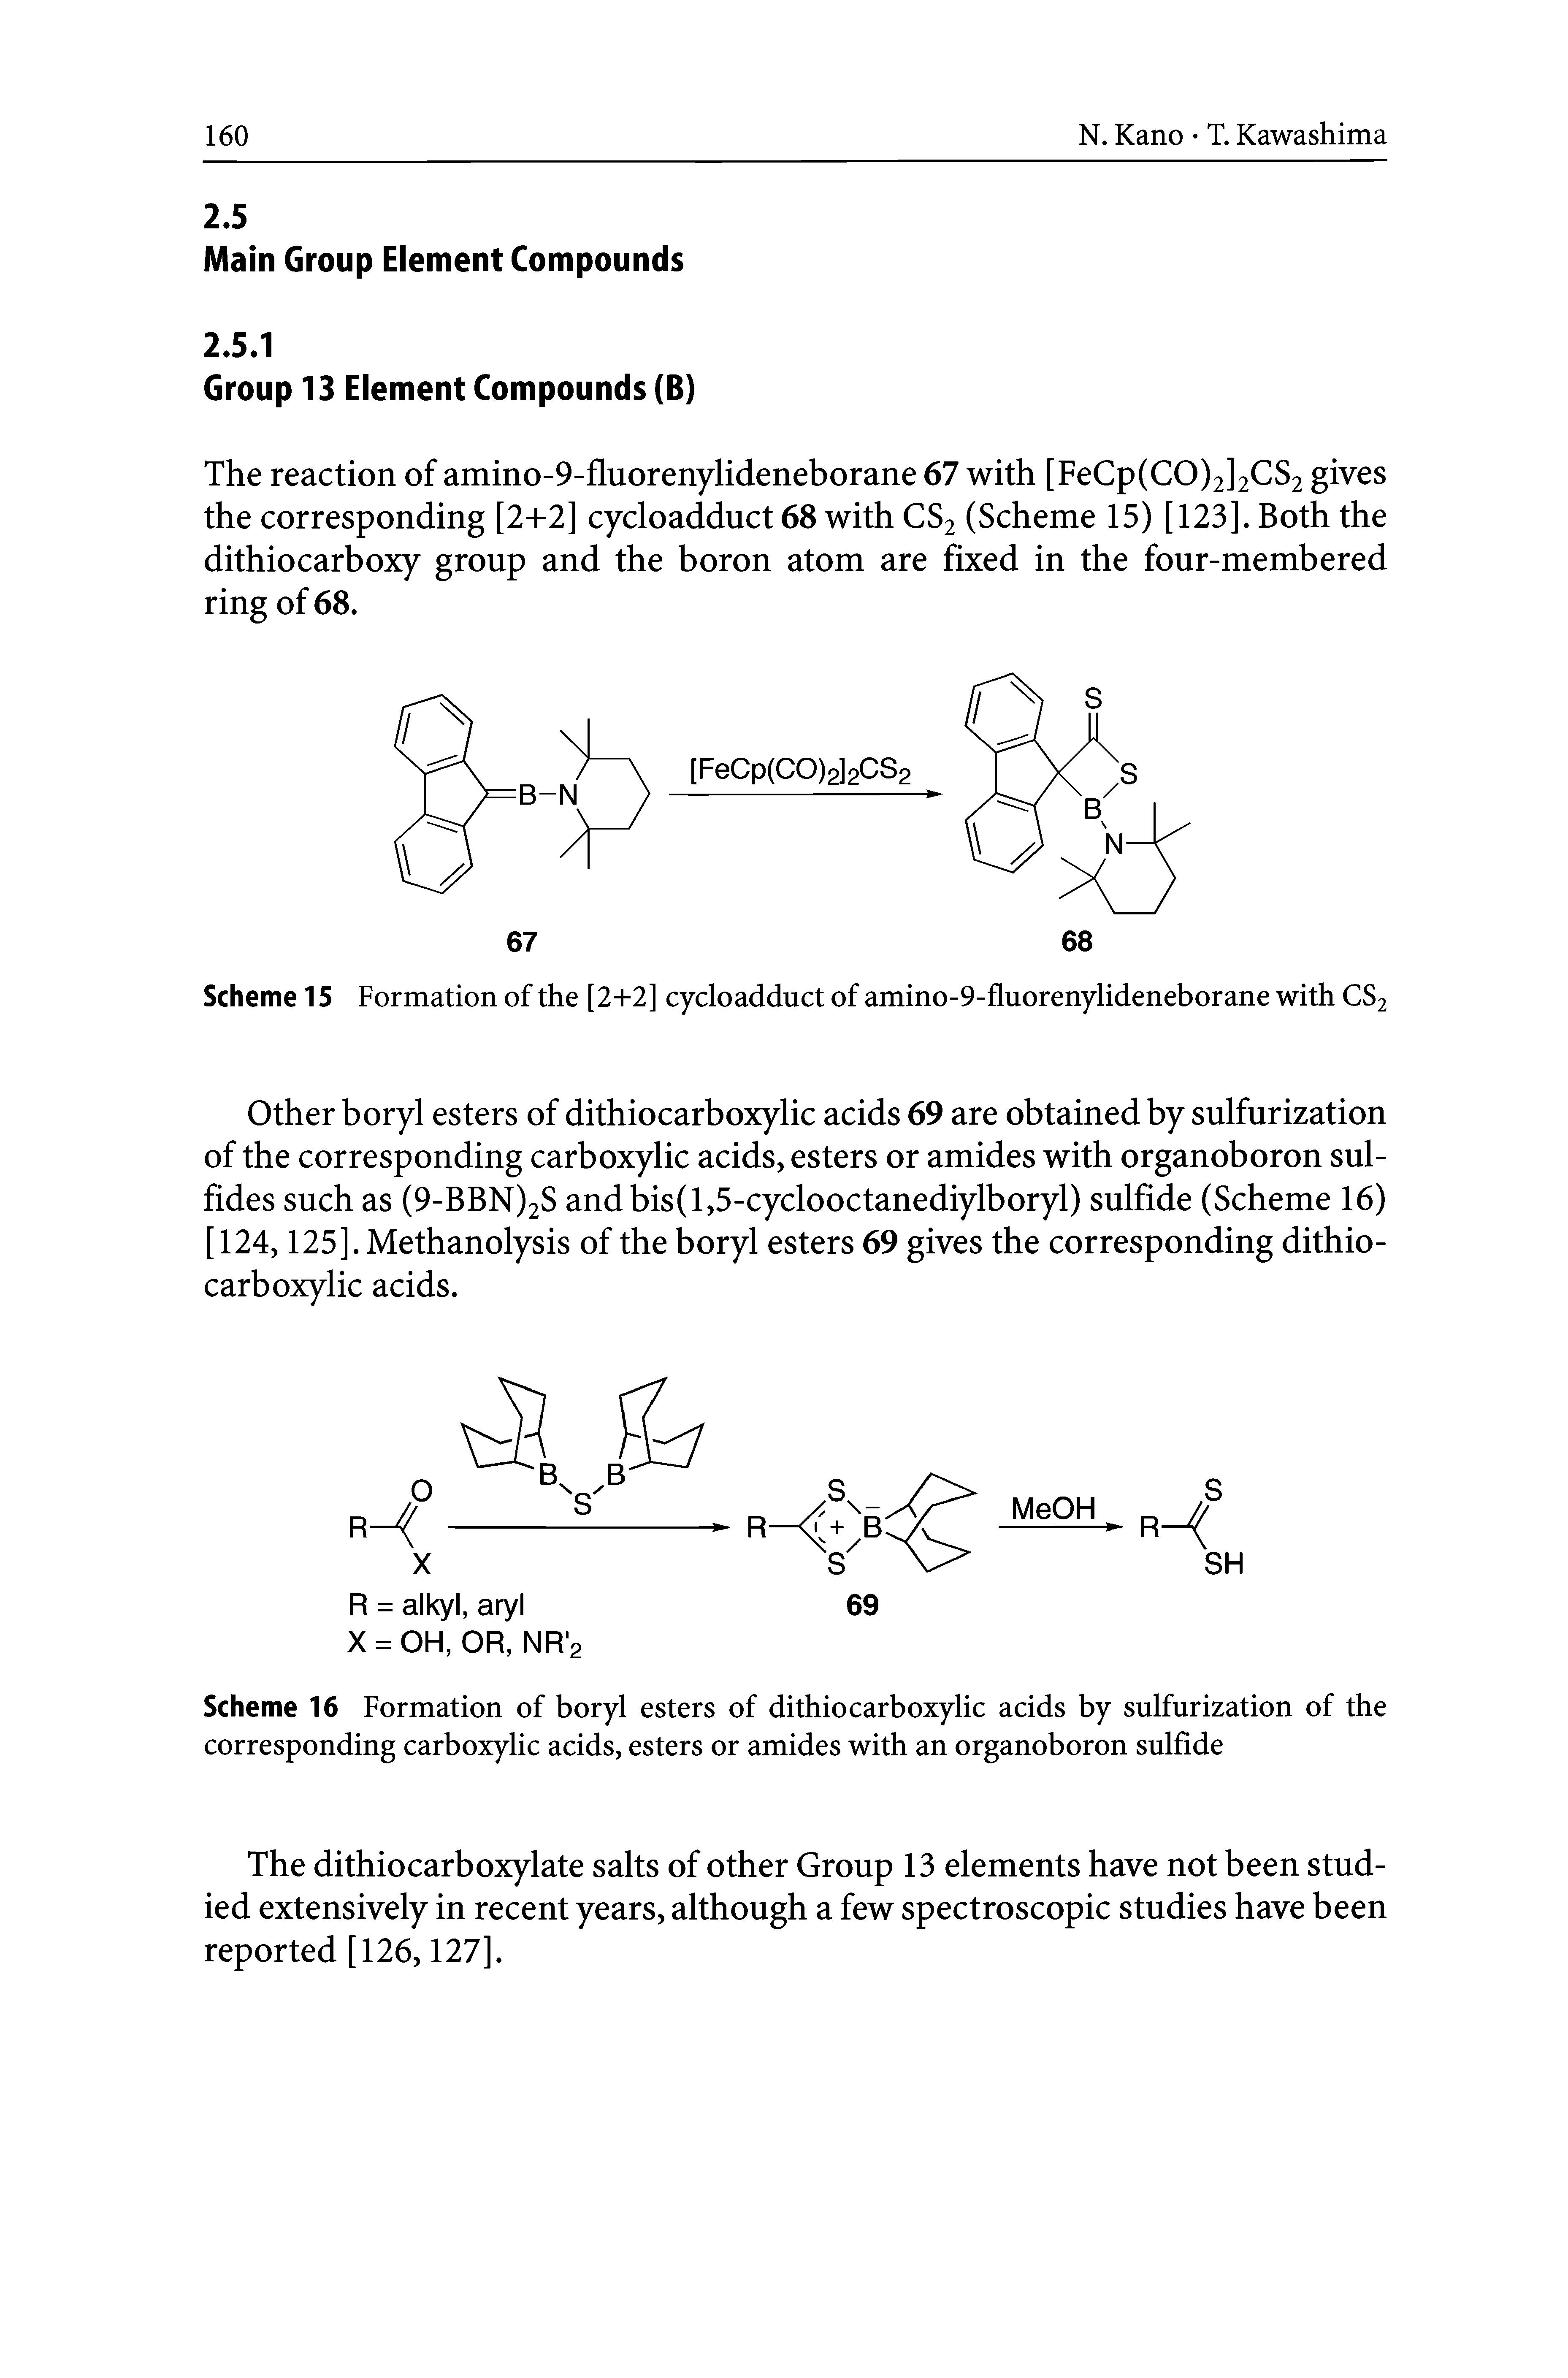 Scheme 16 Formation of boryl esters of dithiocarboxylic acids by sulfurization of the corresponding carboxylic acids, esters or amides with an organoboron sulfide...